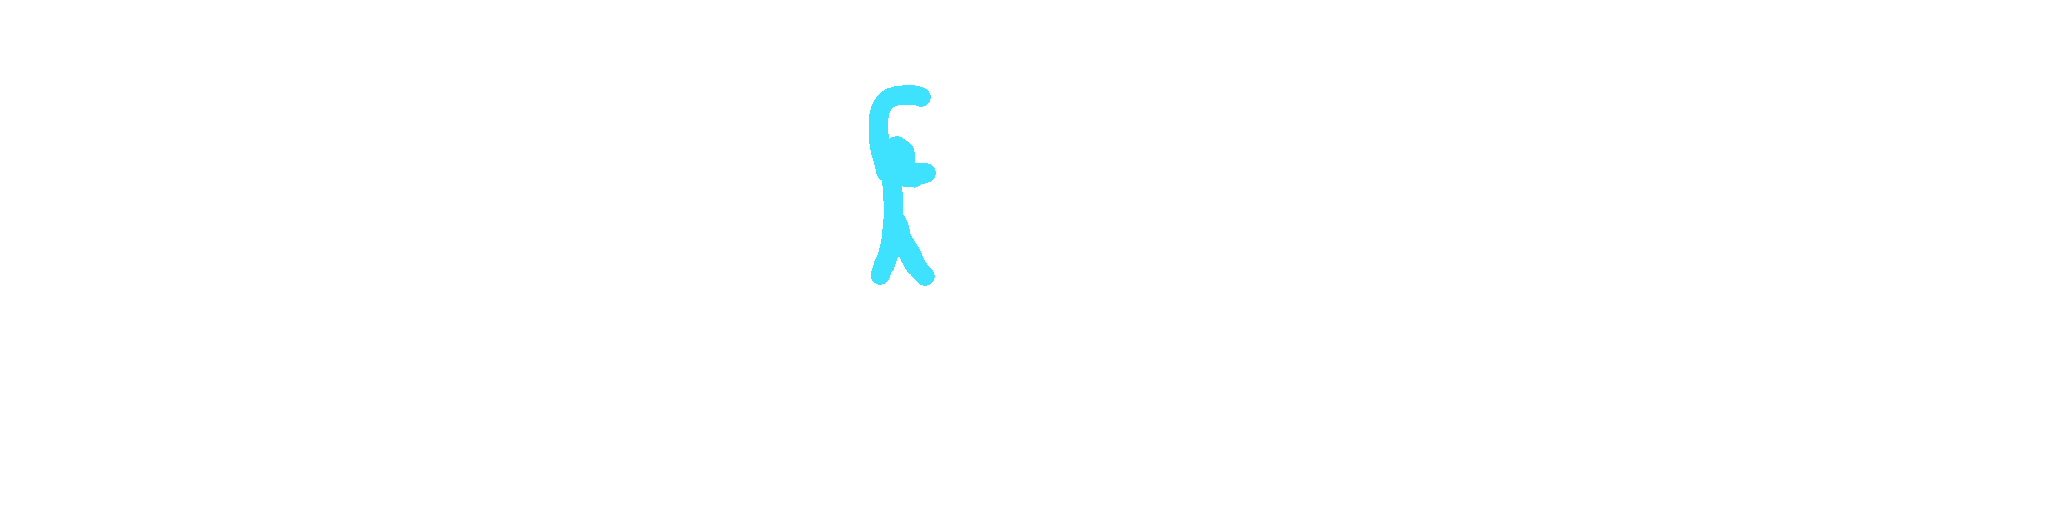 Out of controls